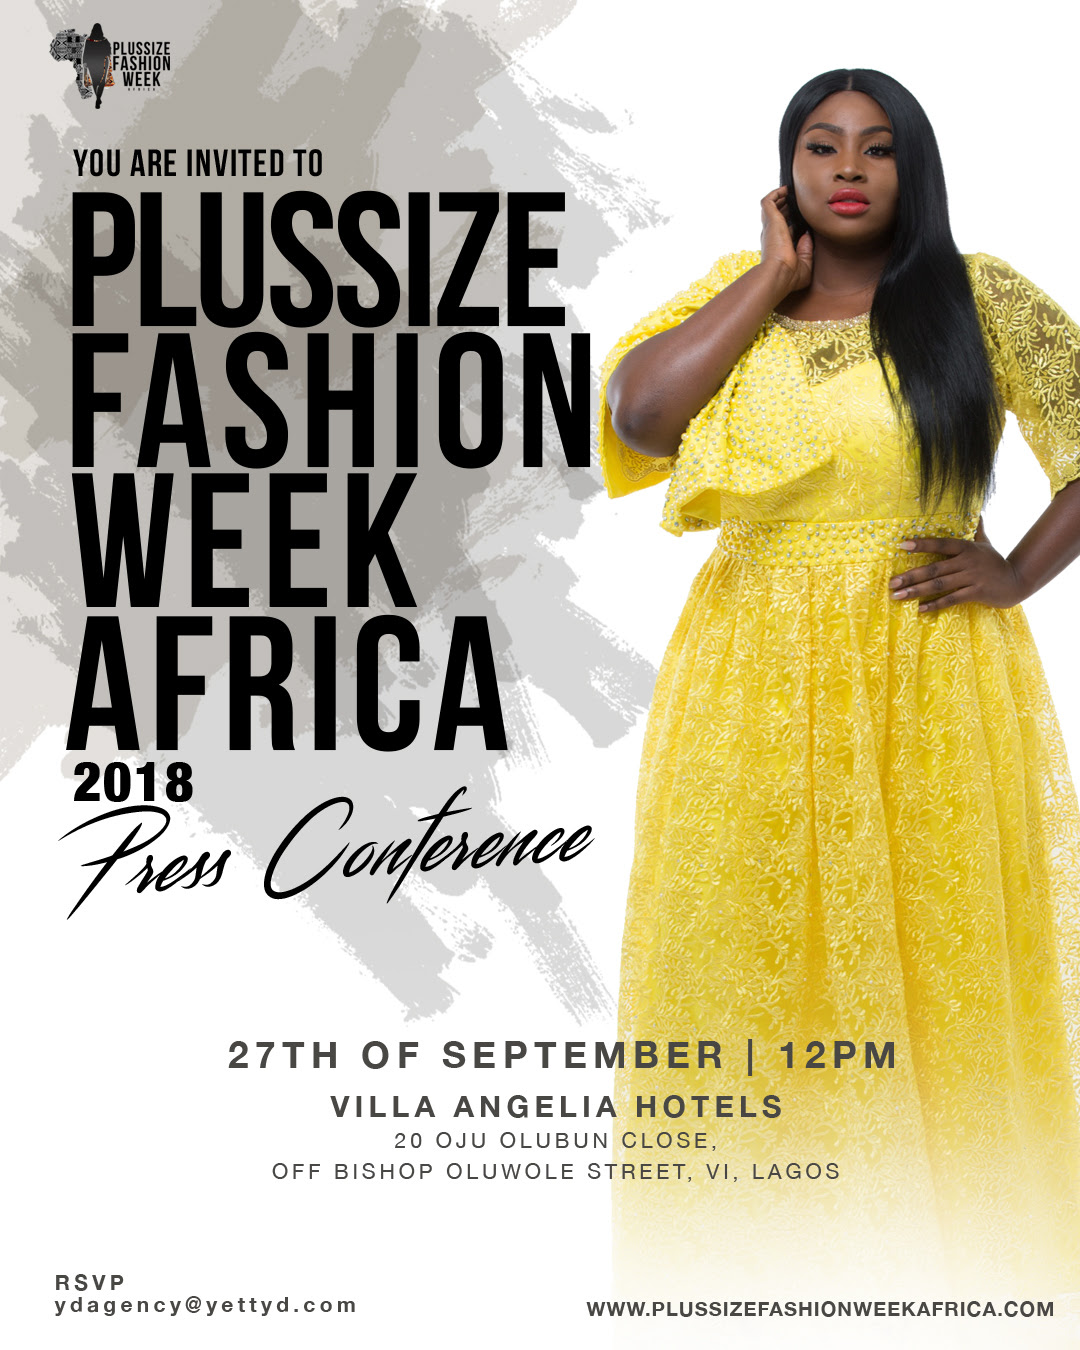 Yetty D: INVITATION TO PFW AFRICA'S PRESS CONFERENCE